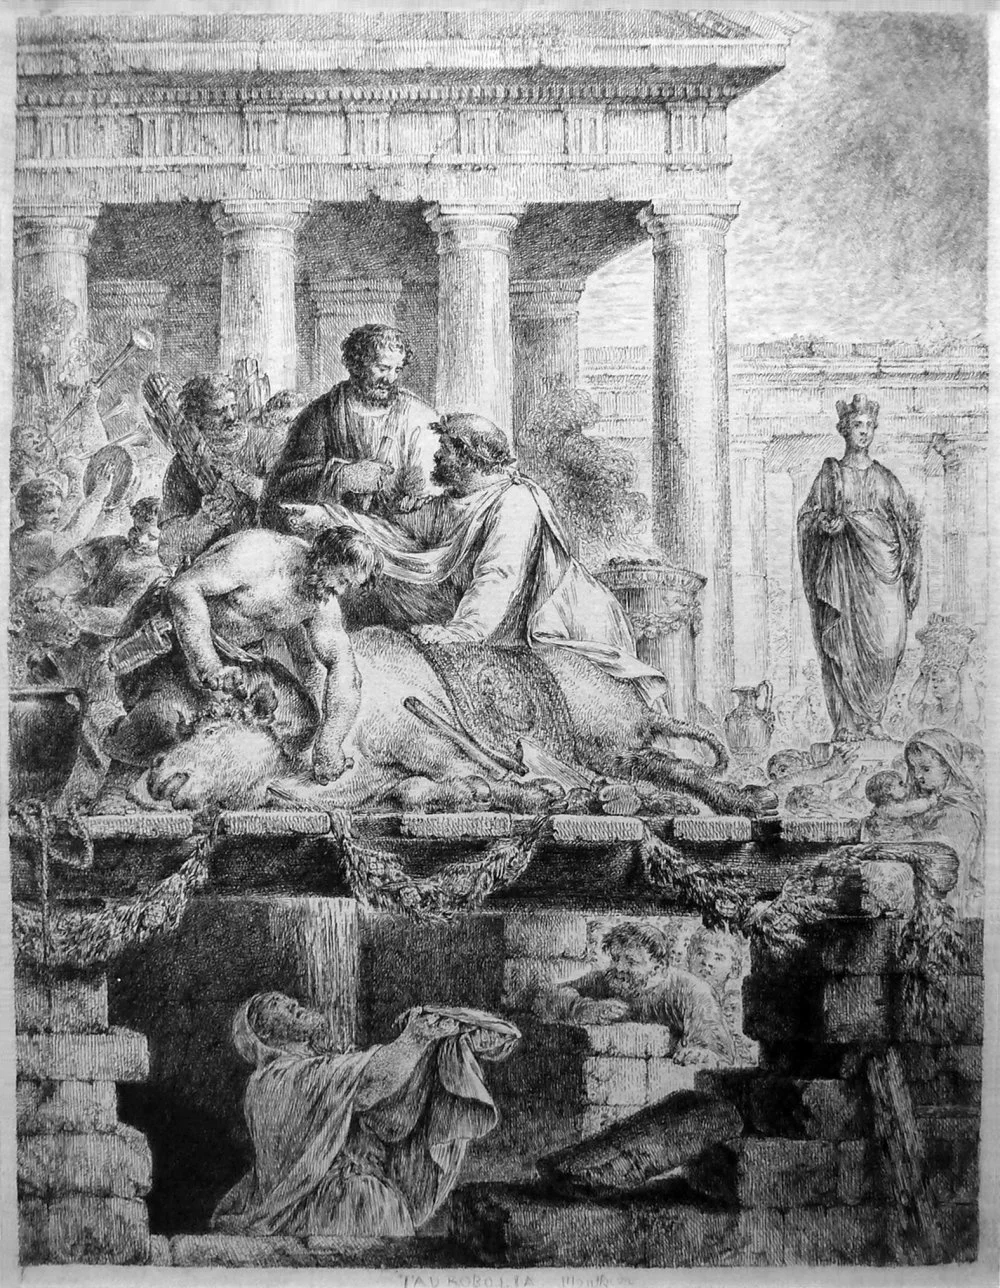 Taurobolium, or Consecration of the Priests of Cybele under Antoninus Pius. Engraving by Bernhard Rode (undated, ca. 1780)/Wikimedia Commons